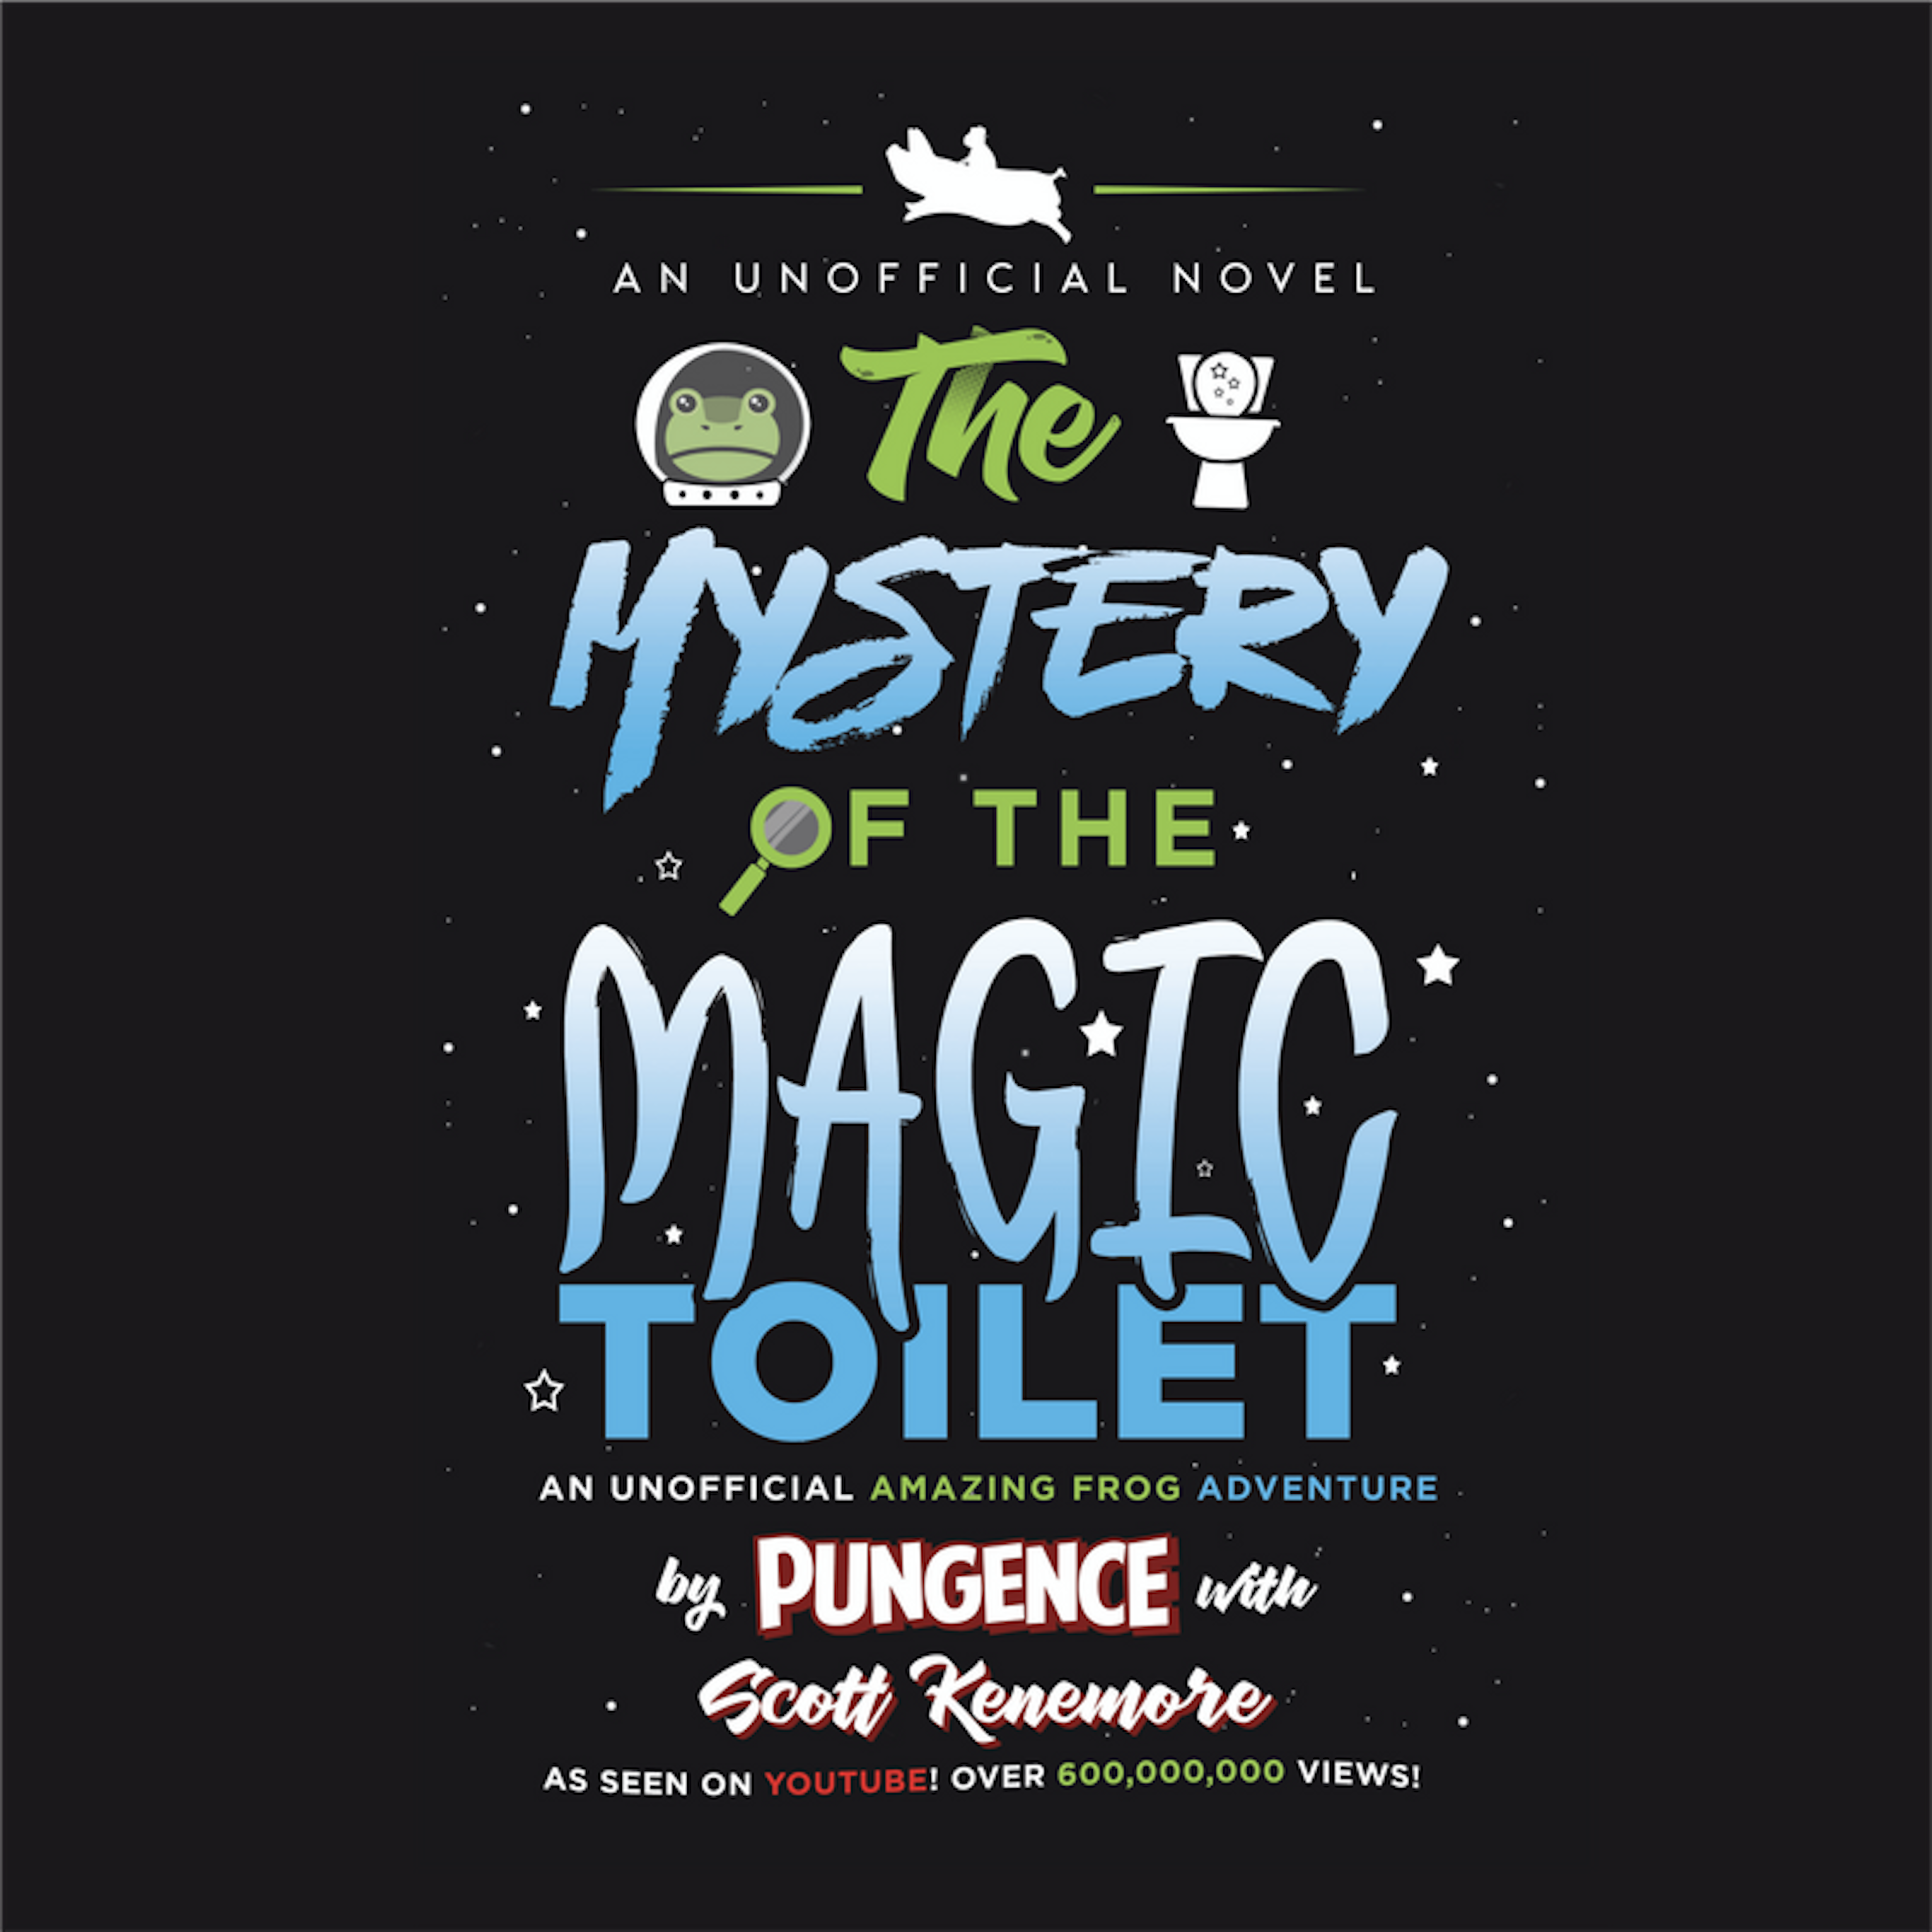 Mystery of the Magic Toilet